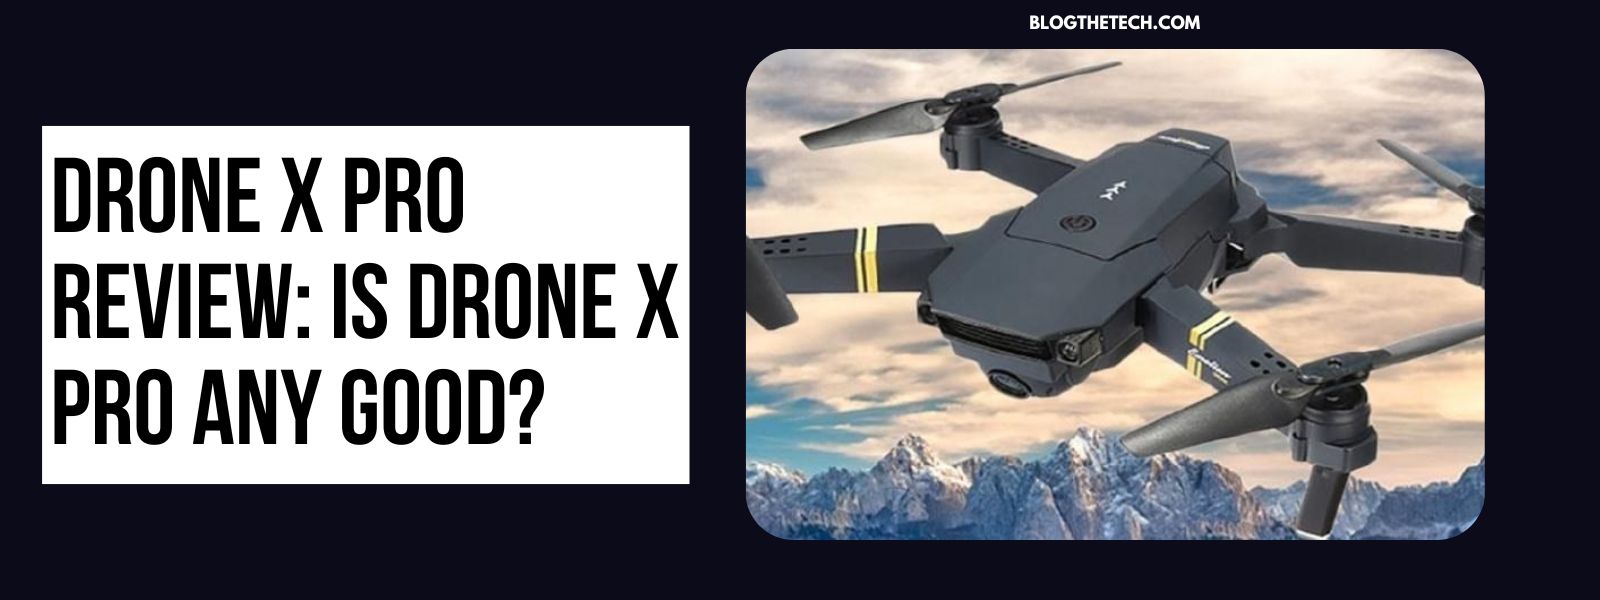 Drone X Pro Review